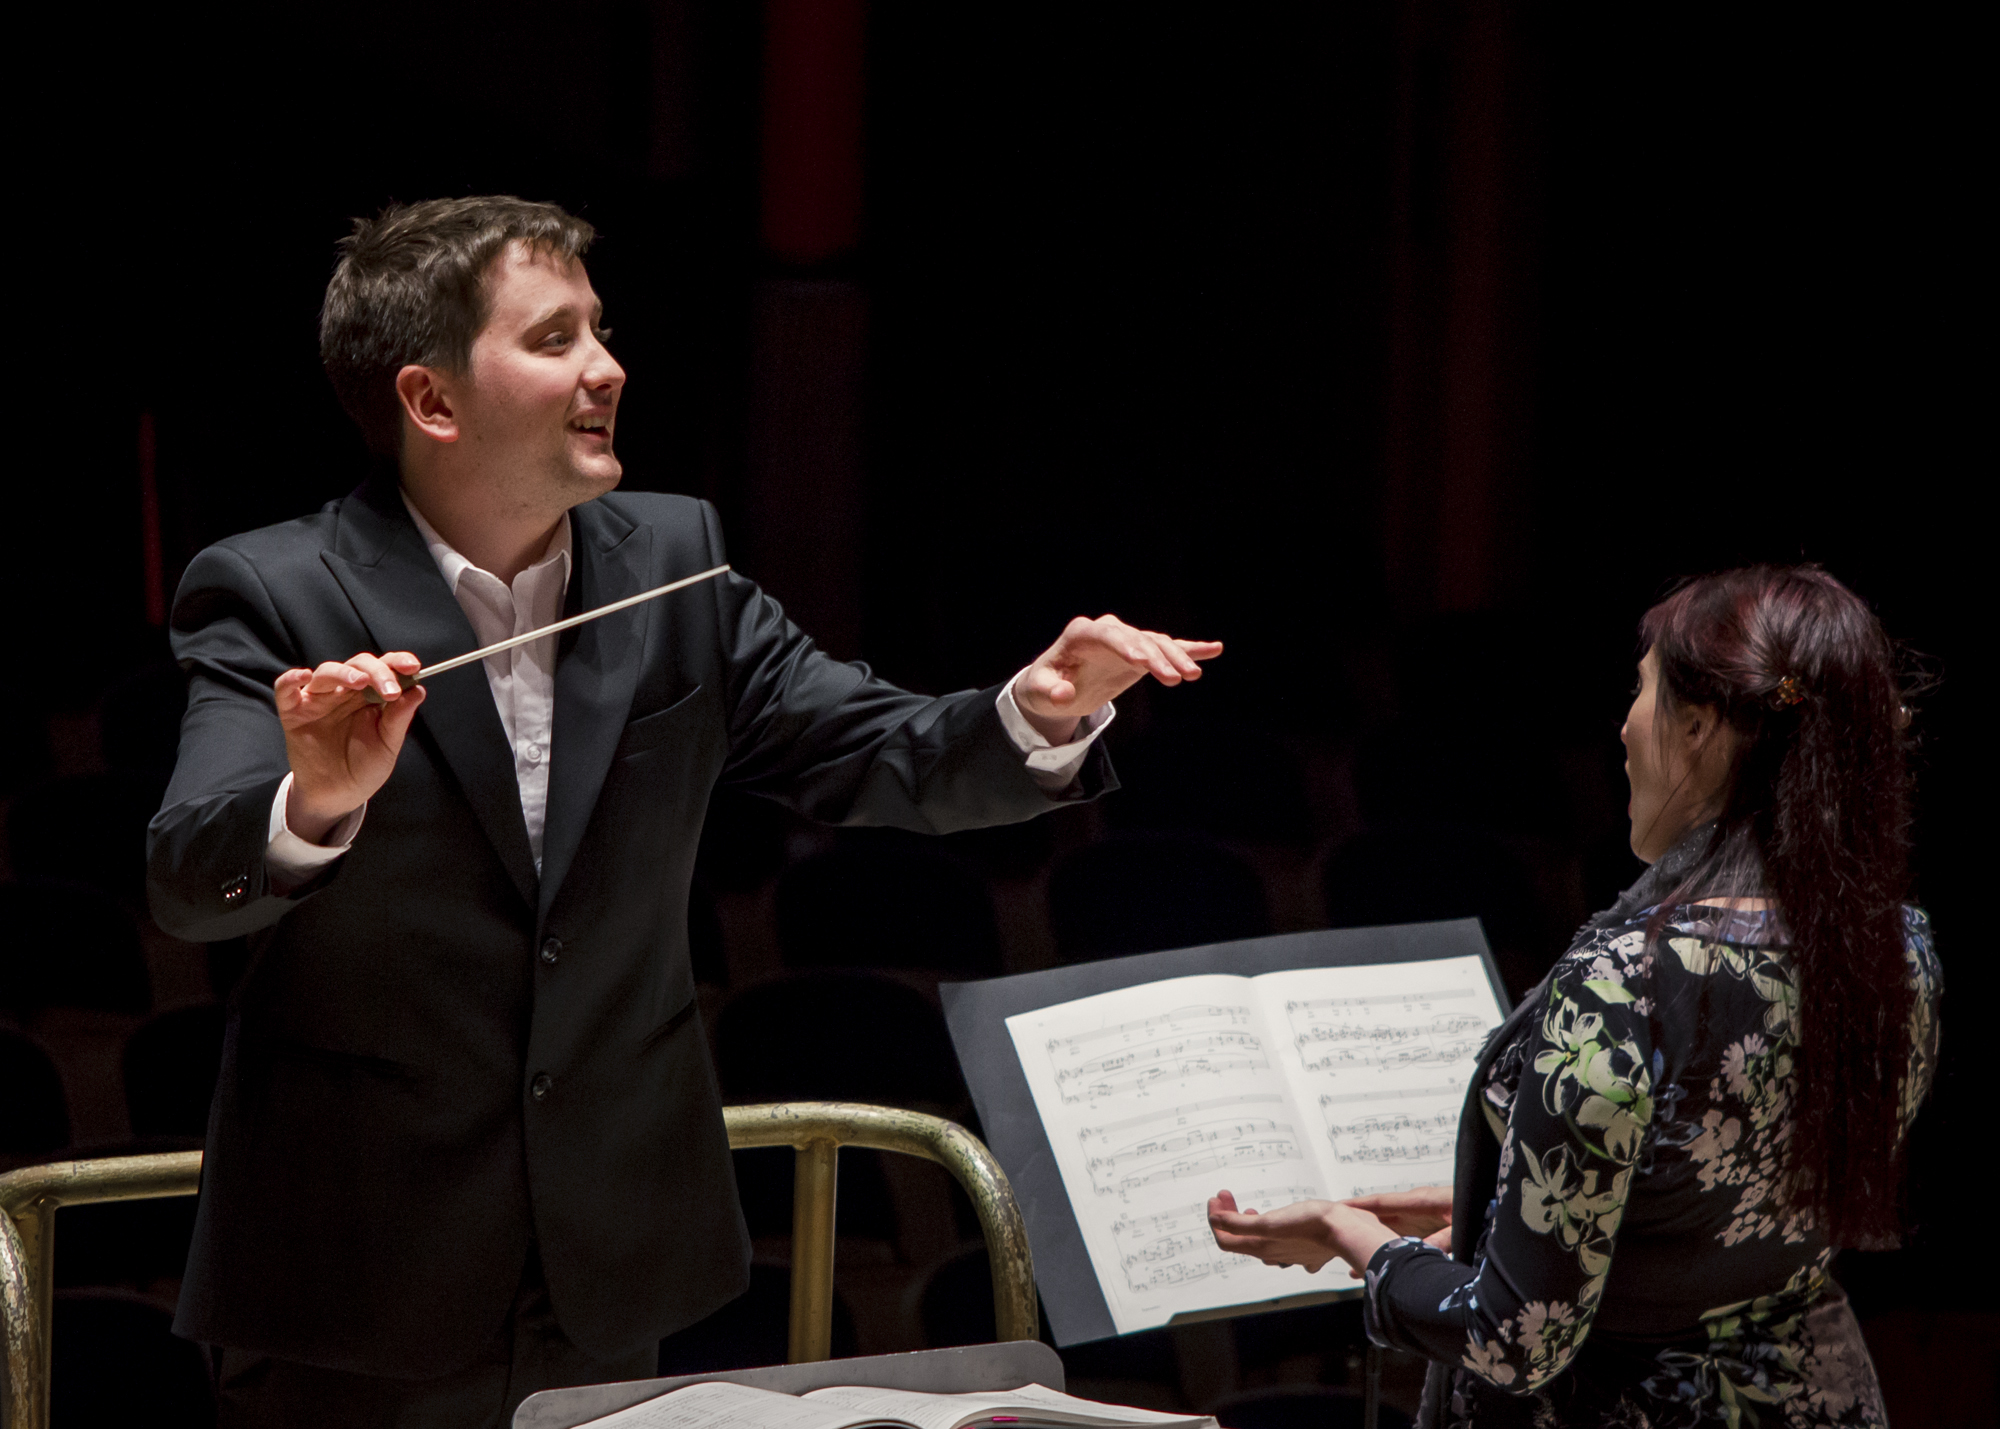 Talented conductor who conquered childhood deafness scales musical heights on global stage